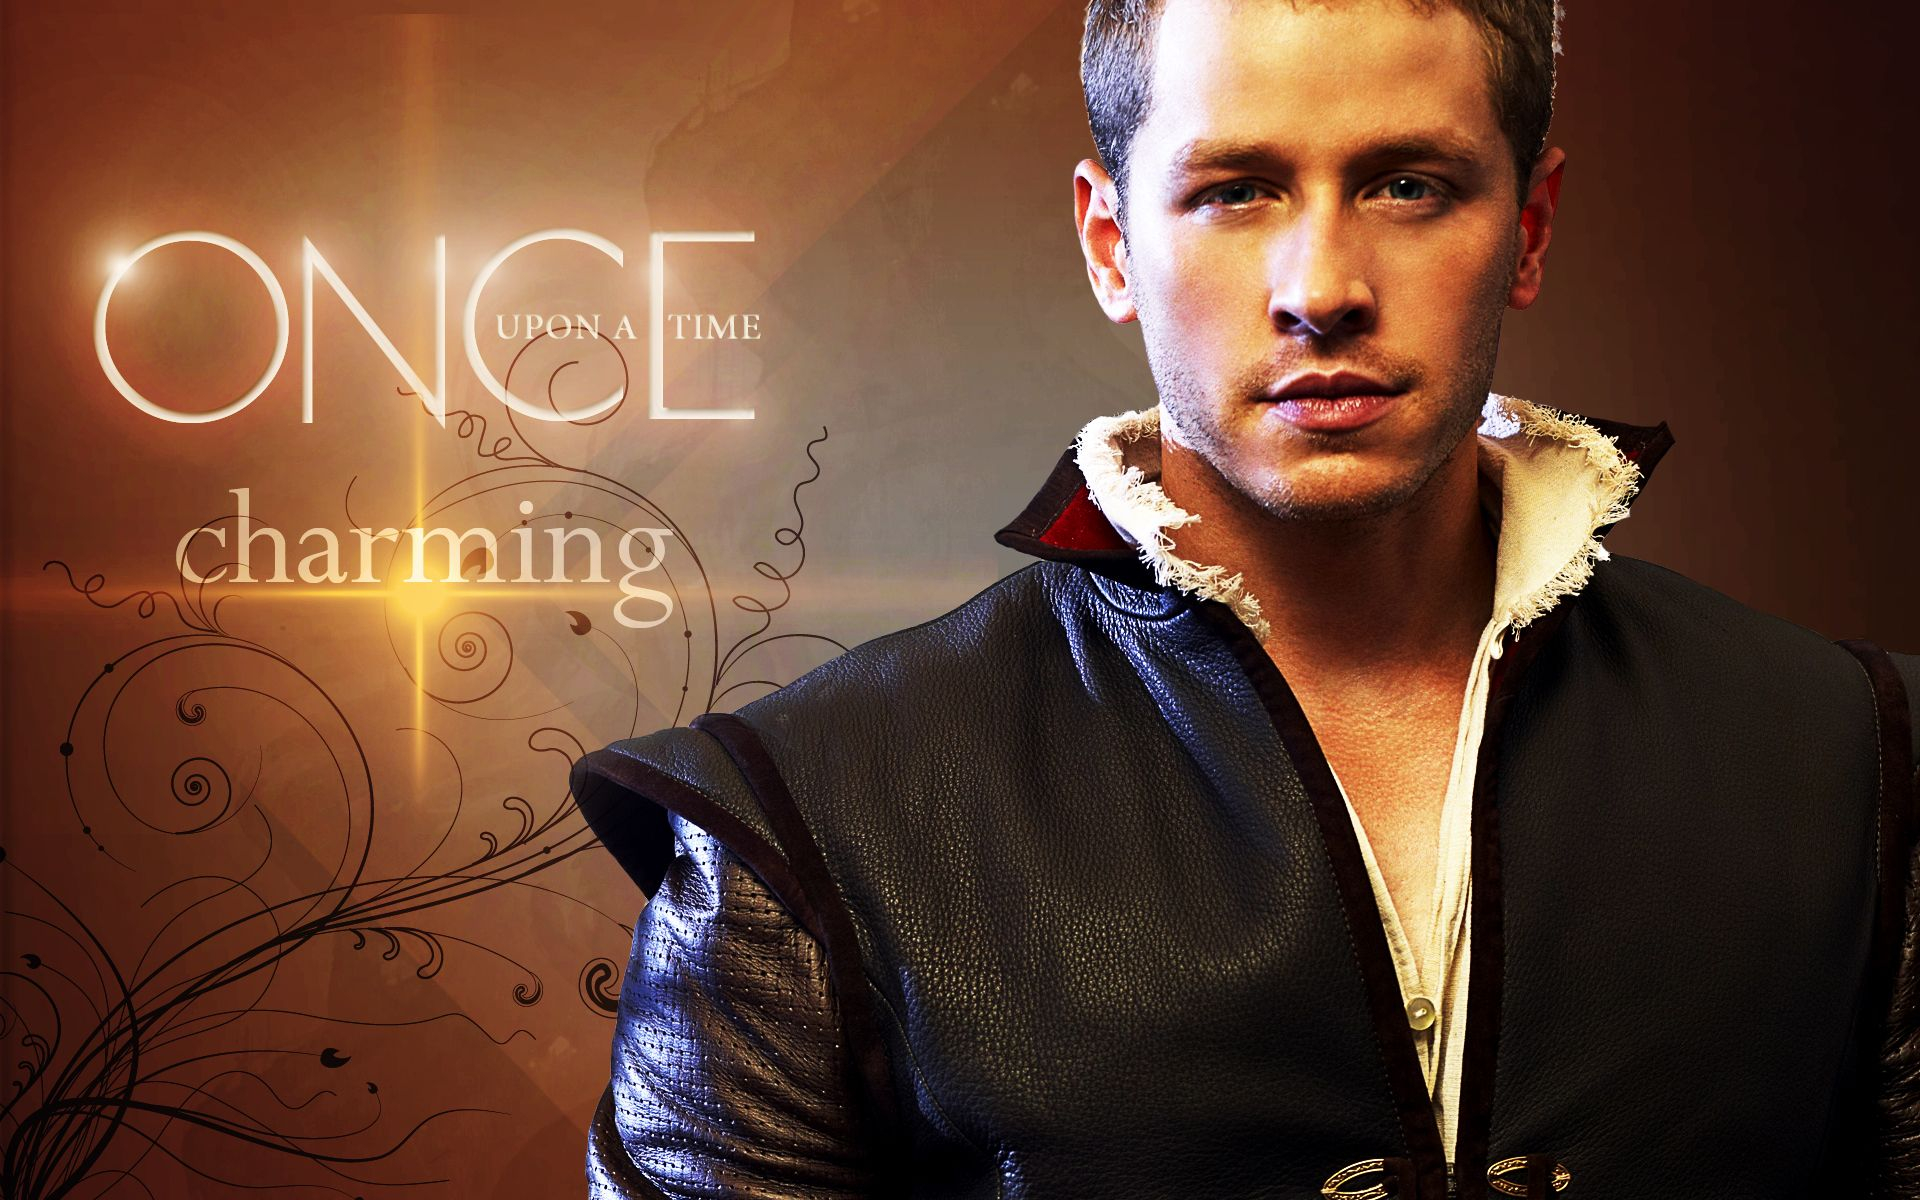 1920x1200 Once Upon A Time Wallpaper: Prince Charming | Prince charming, Once upon a time, Prince